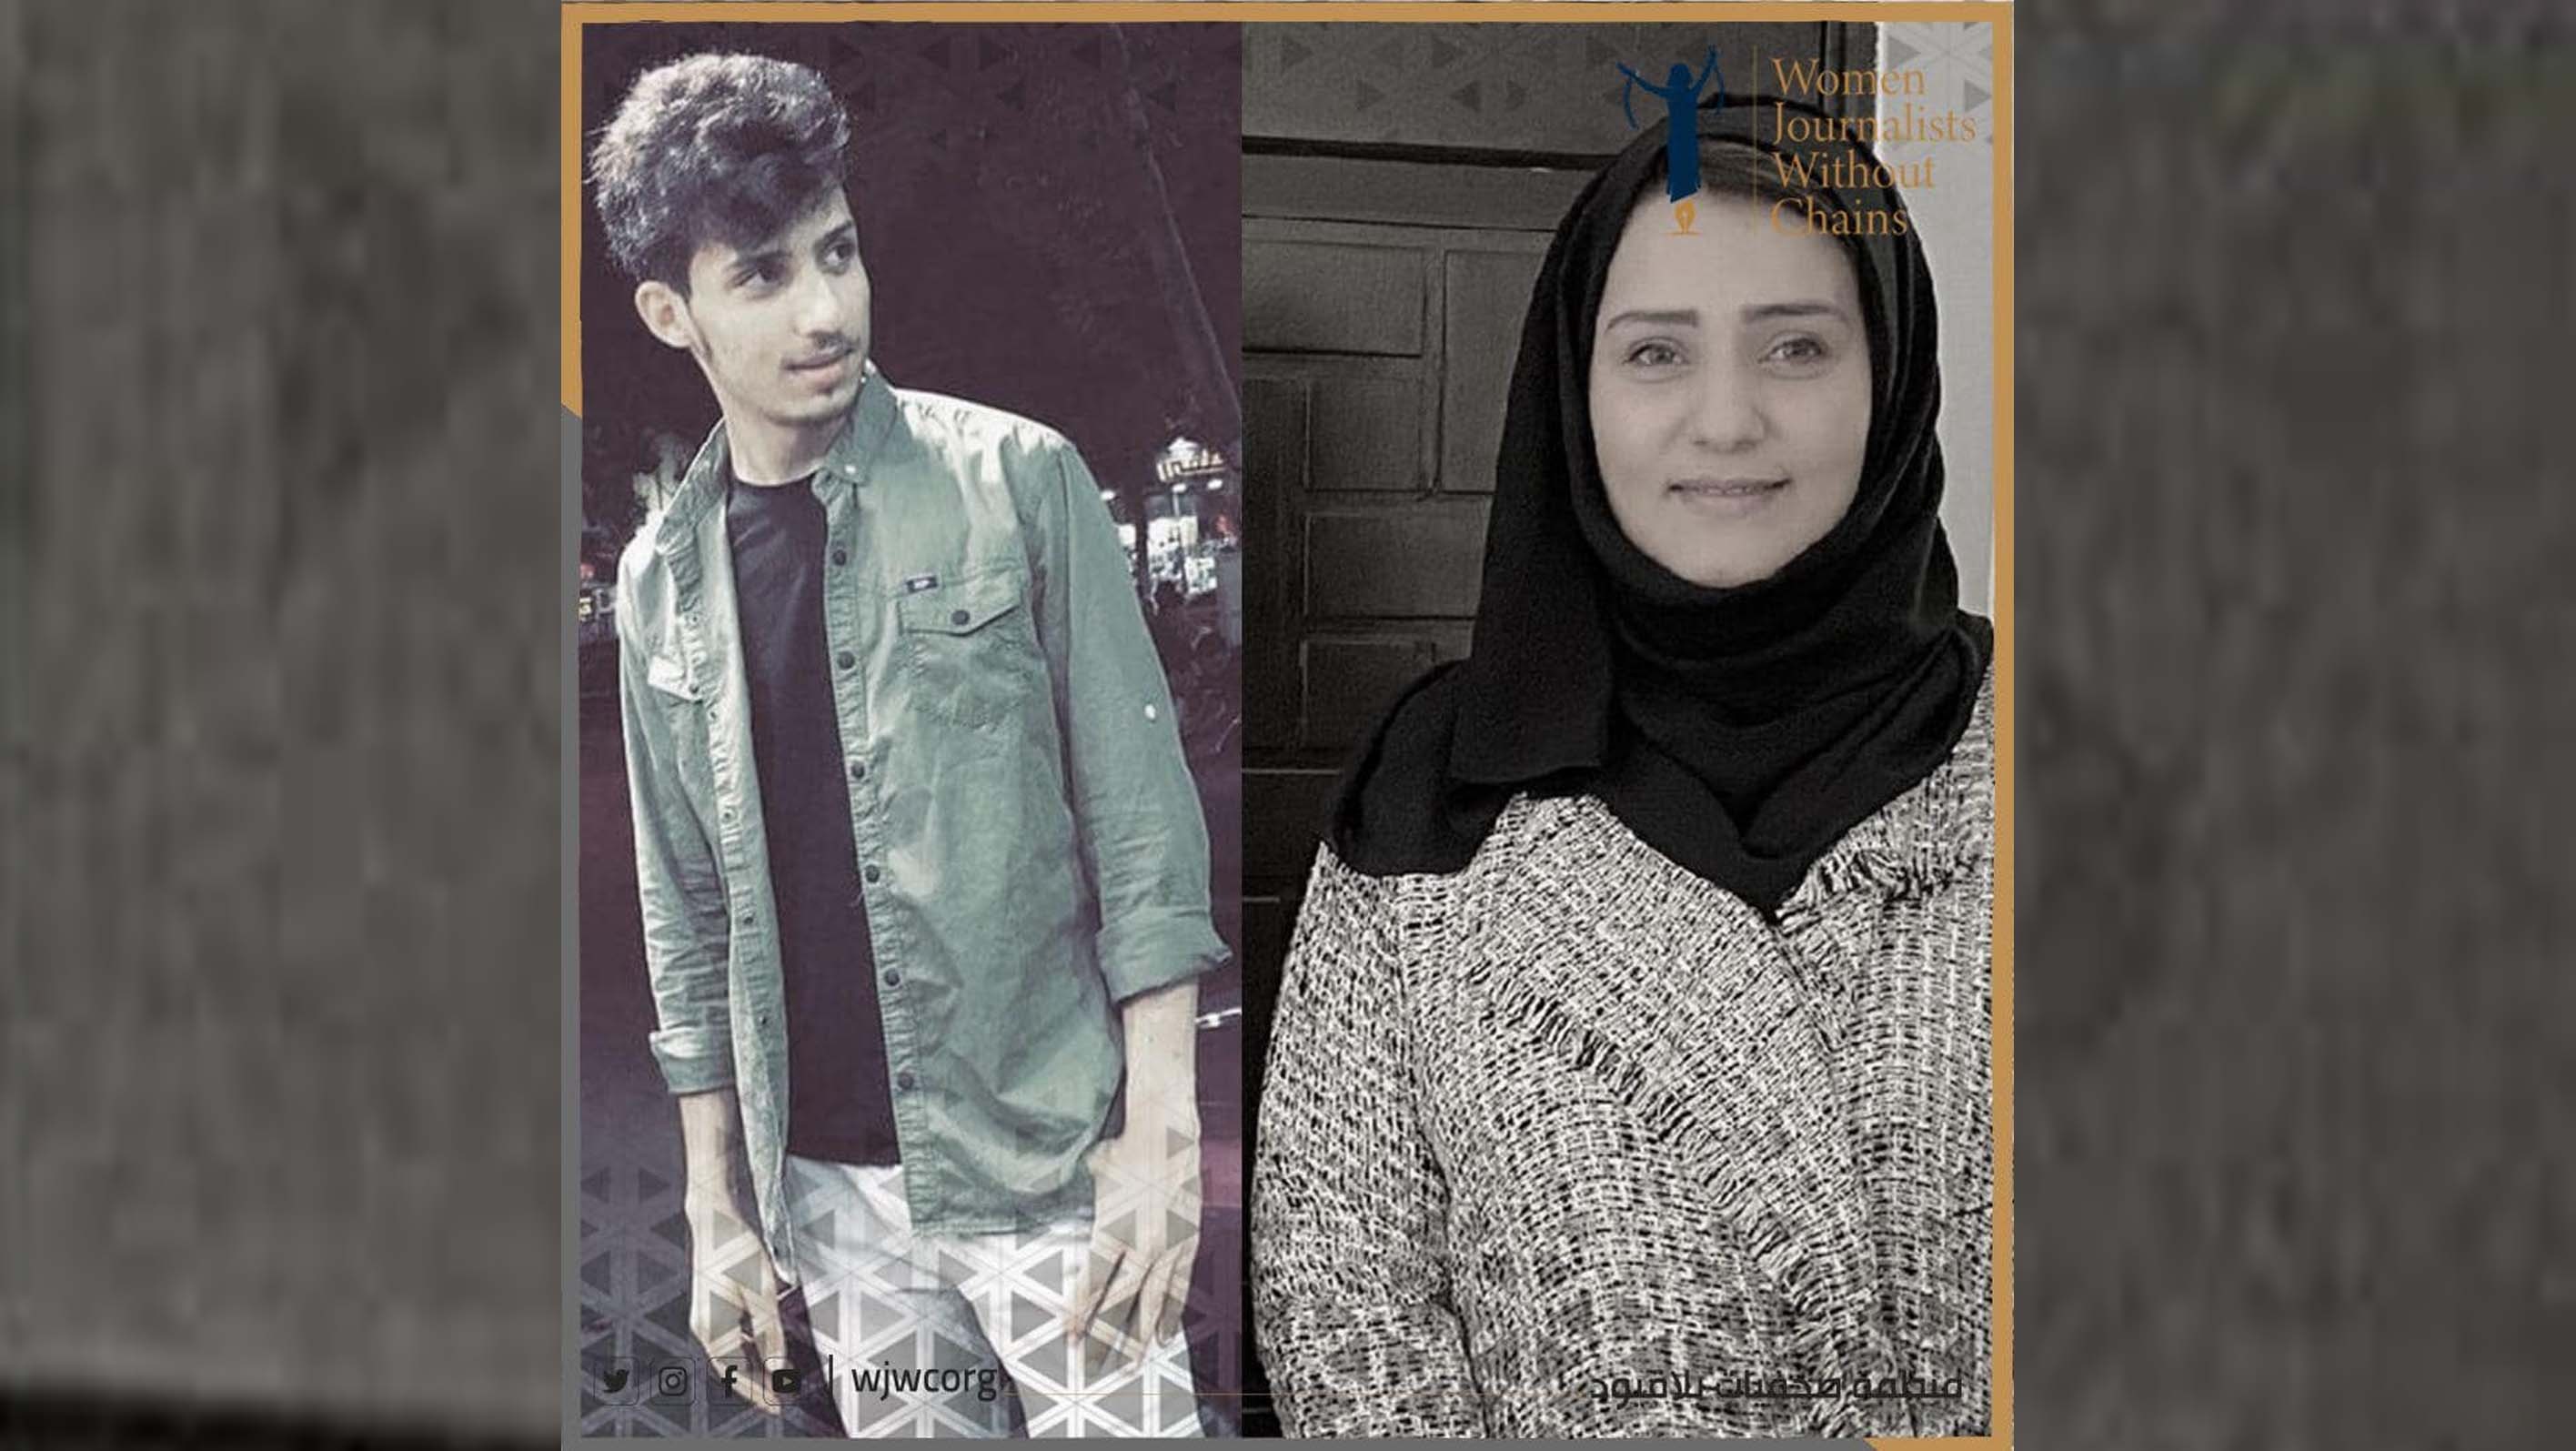 Female writer and son go missing in Saudi capital, prompting calls for answers